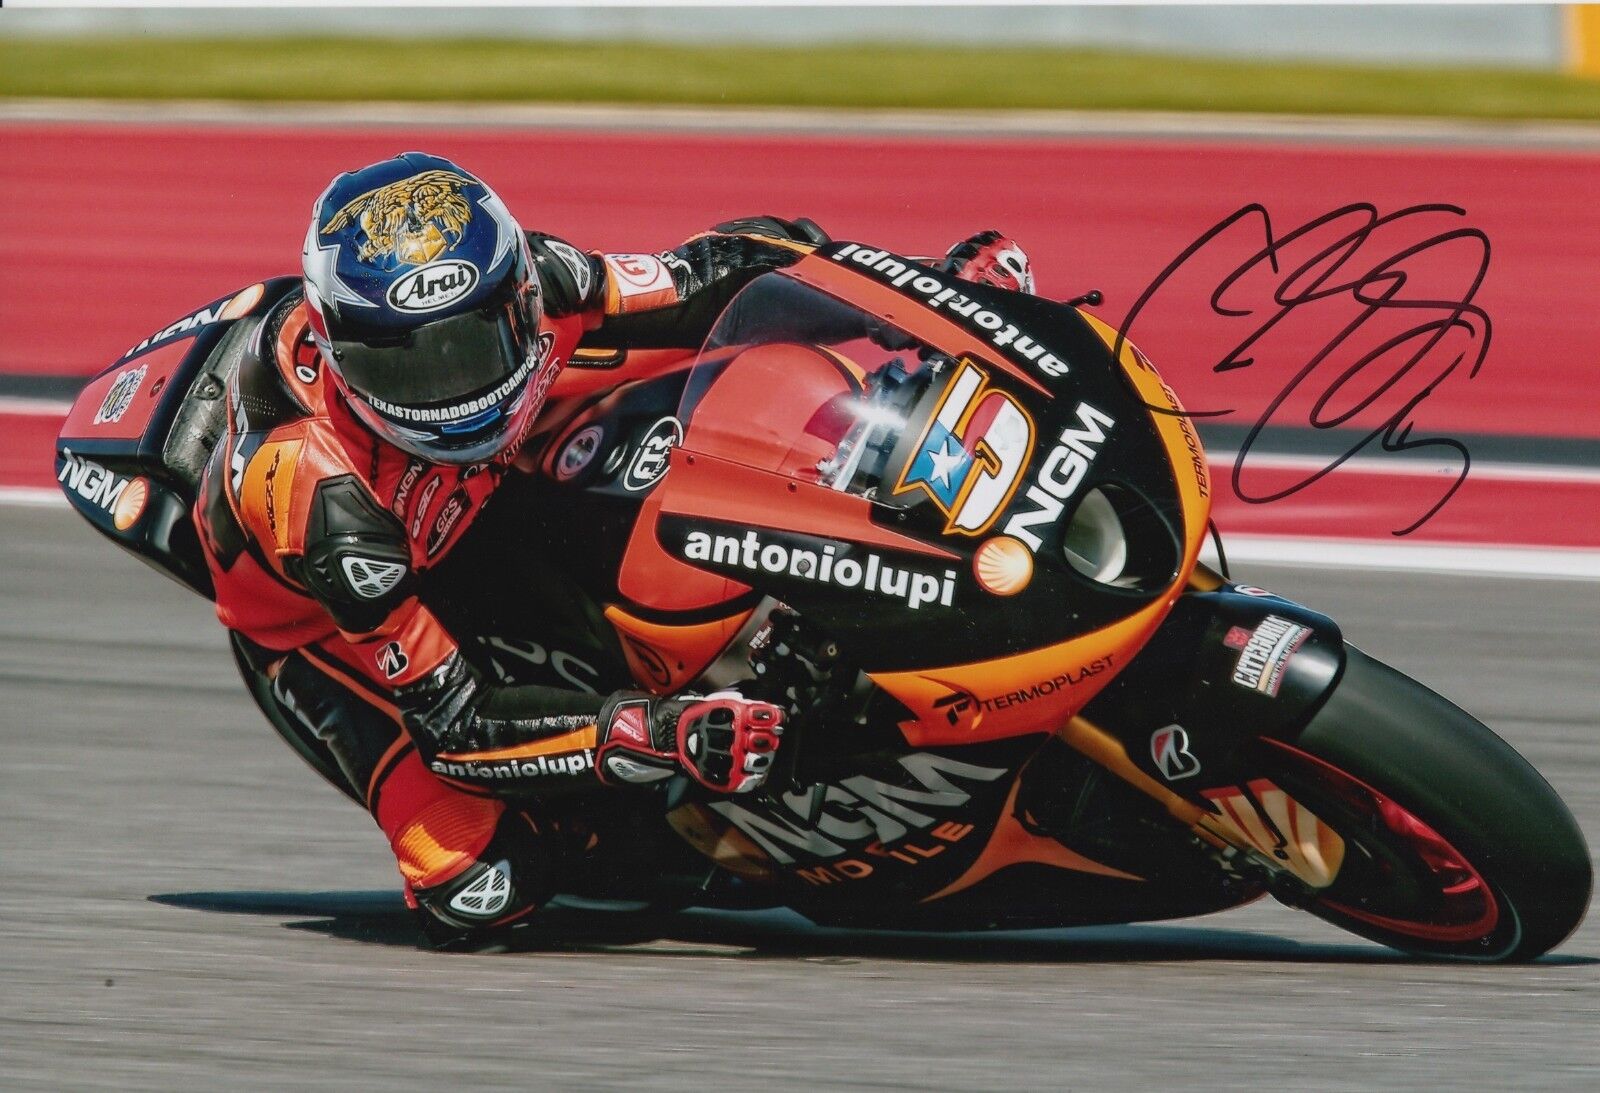 Colin Edwards Hand Signed NGM Mobile Forward Racing 12x8 Photo Poster painting MOTOGP.